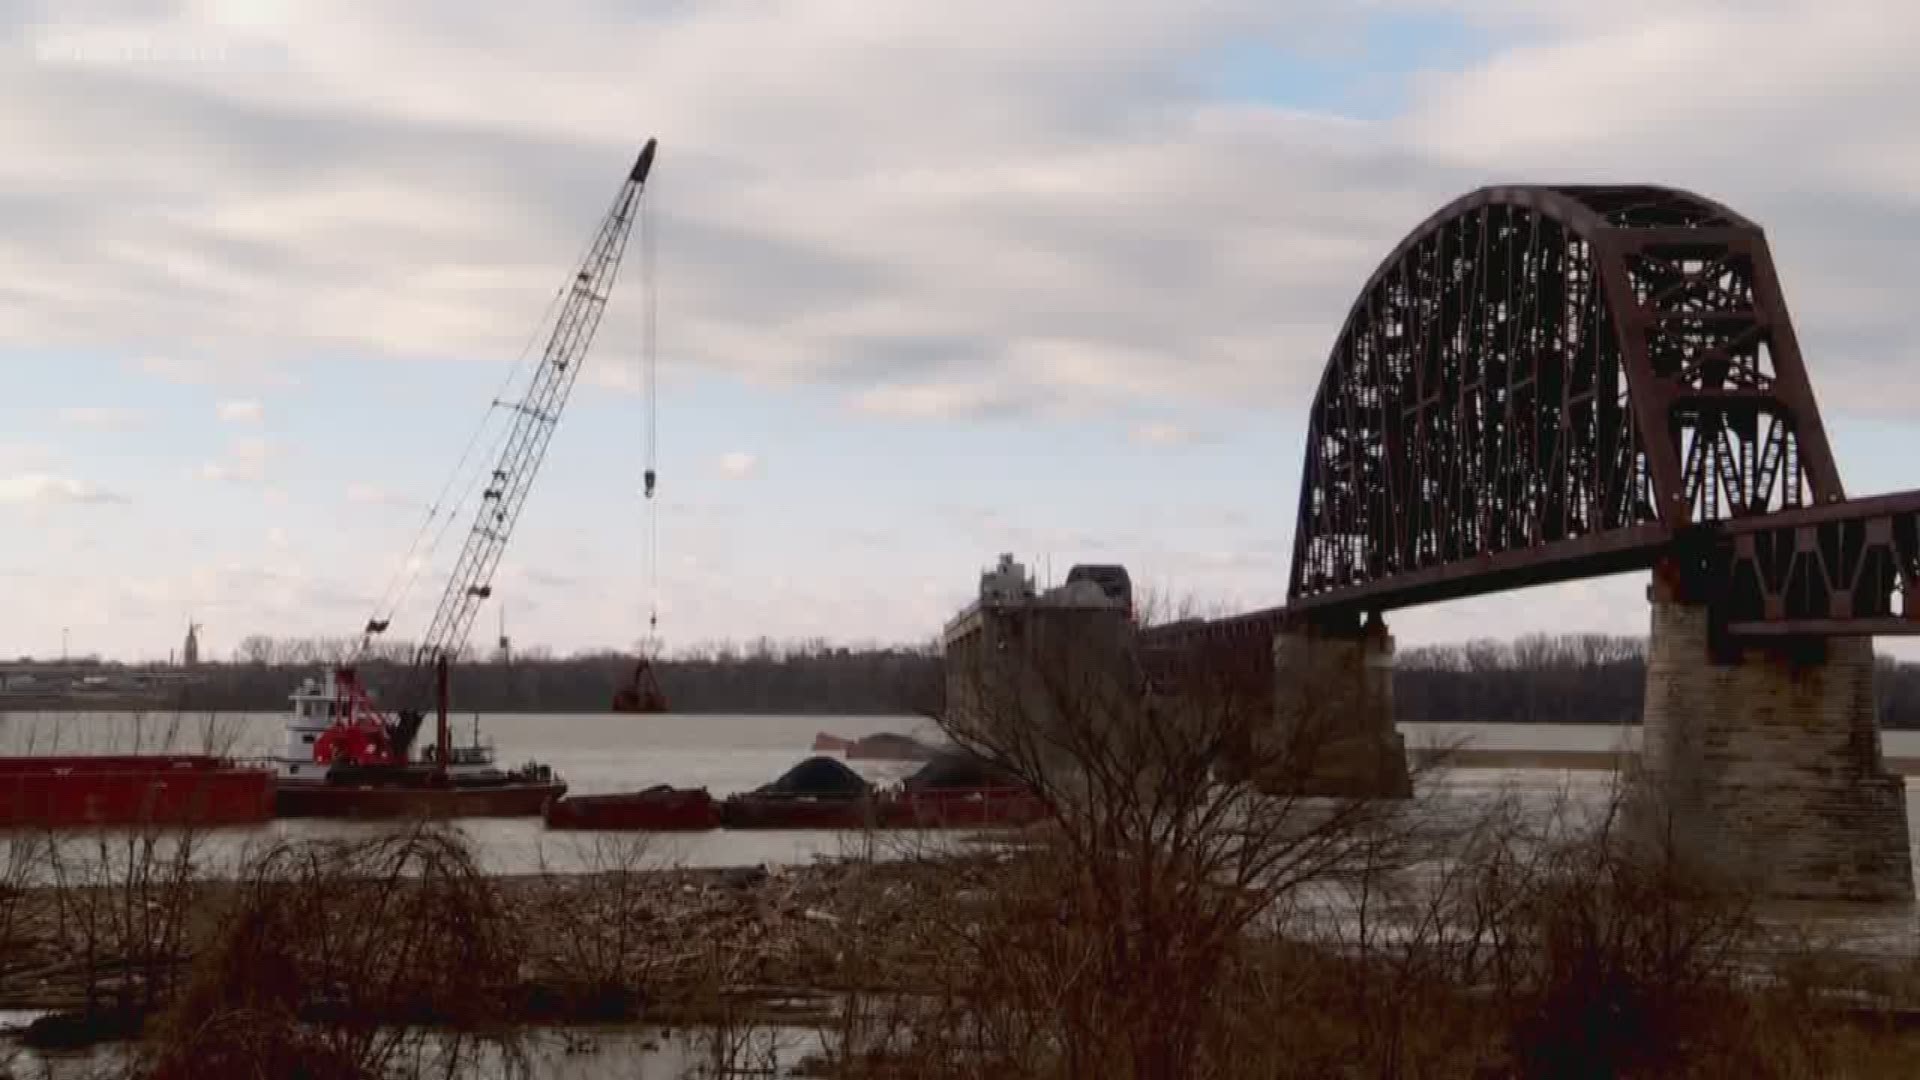 For two weeks several coal barges have been stuck on the Ohio River, near the Falls of the Ohio,after they broke loose from a towing vessel when it crashed into the Clark Memorial Bridge on Christmas Day.